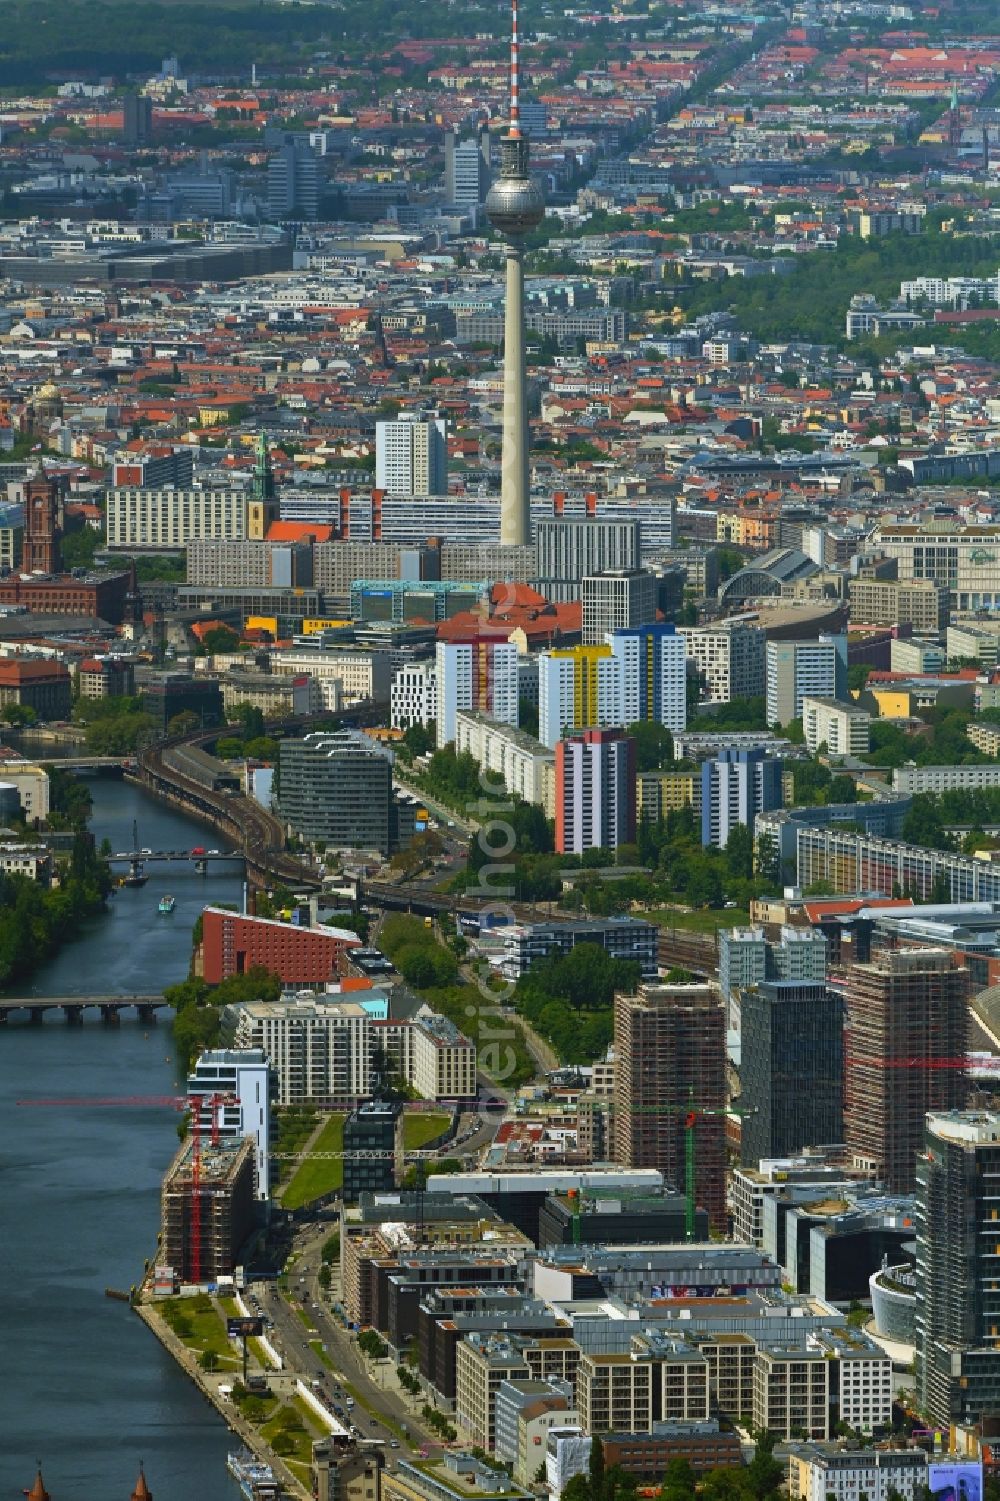 Berlin from above - City view Anschutz Areal on the river bank of Spree River in the district Friedrichshain in Berlin, Germany